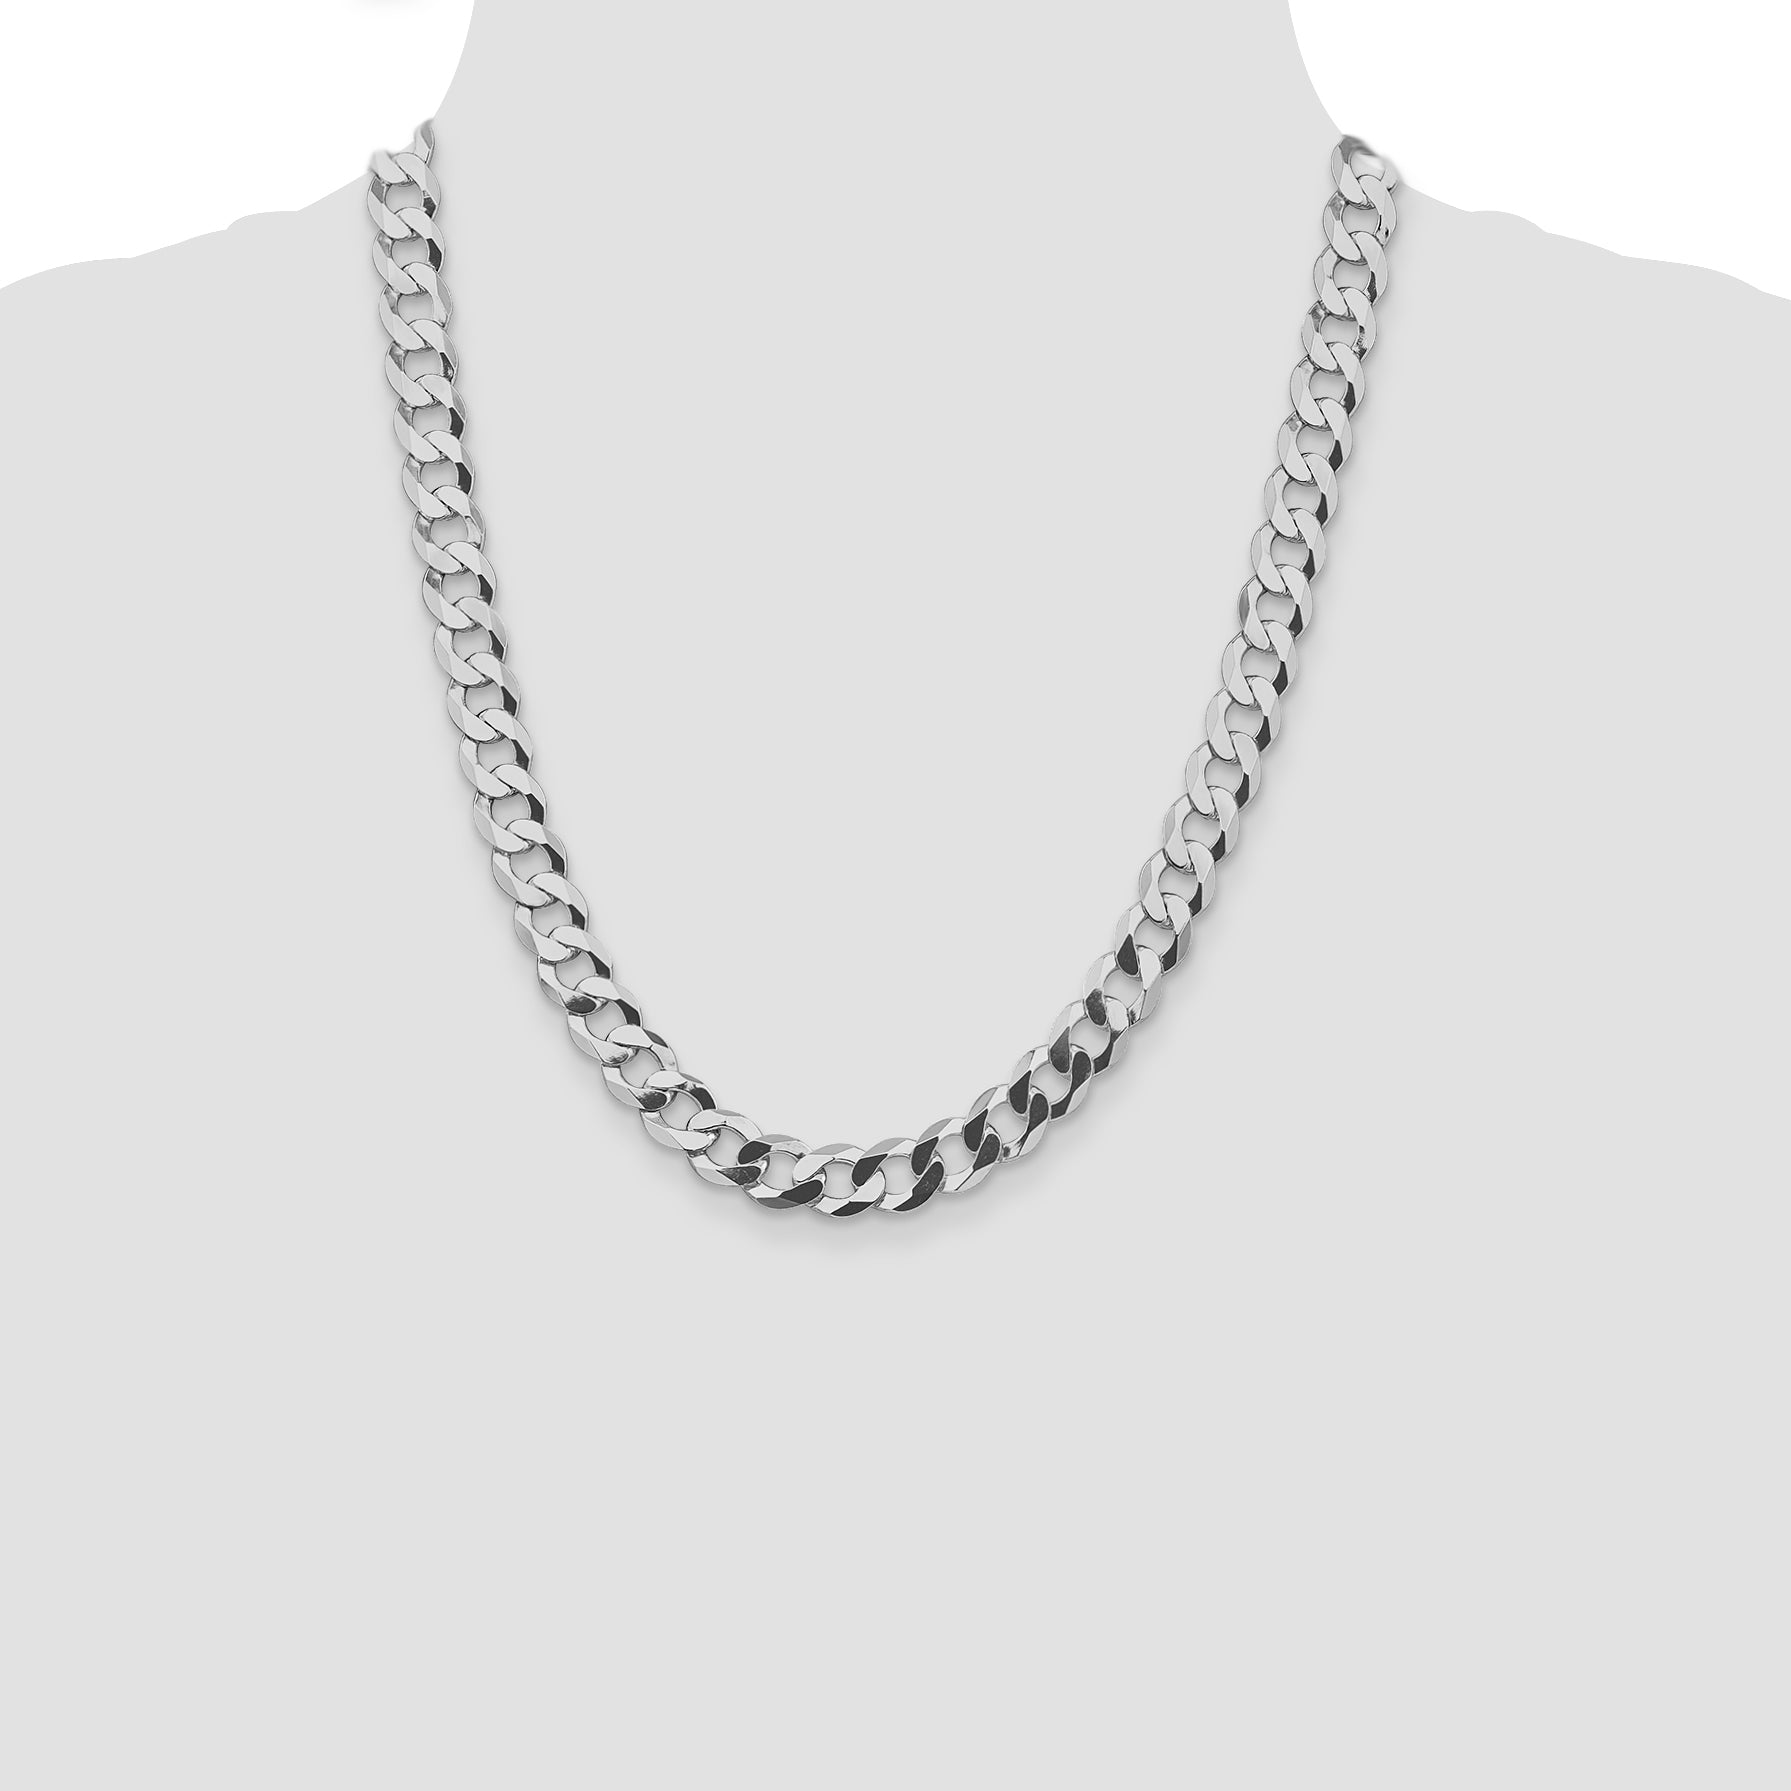 Sterling Silver Rhodium-plated 9.75mm Flat Curb Chain